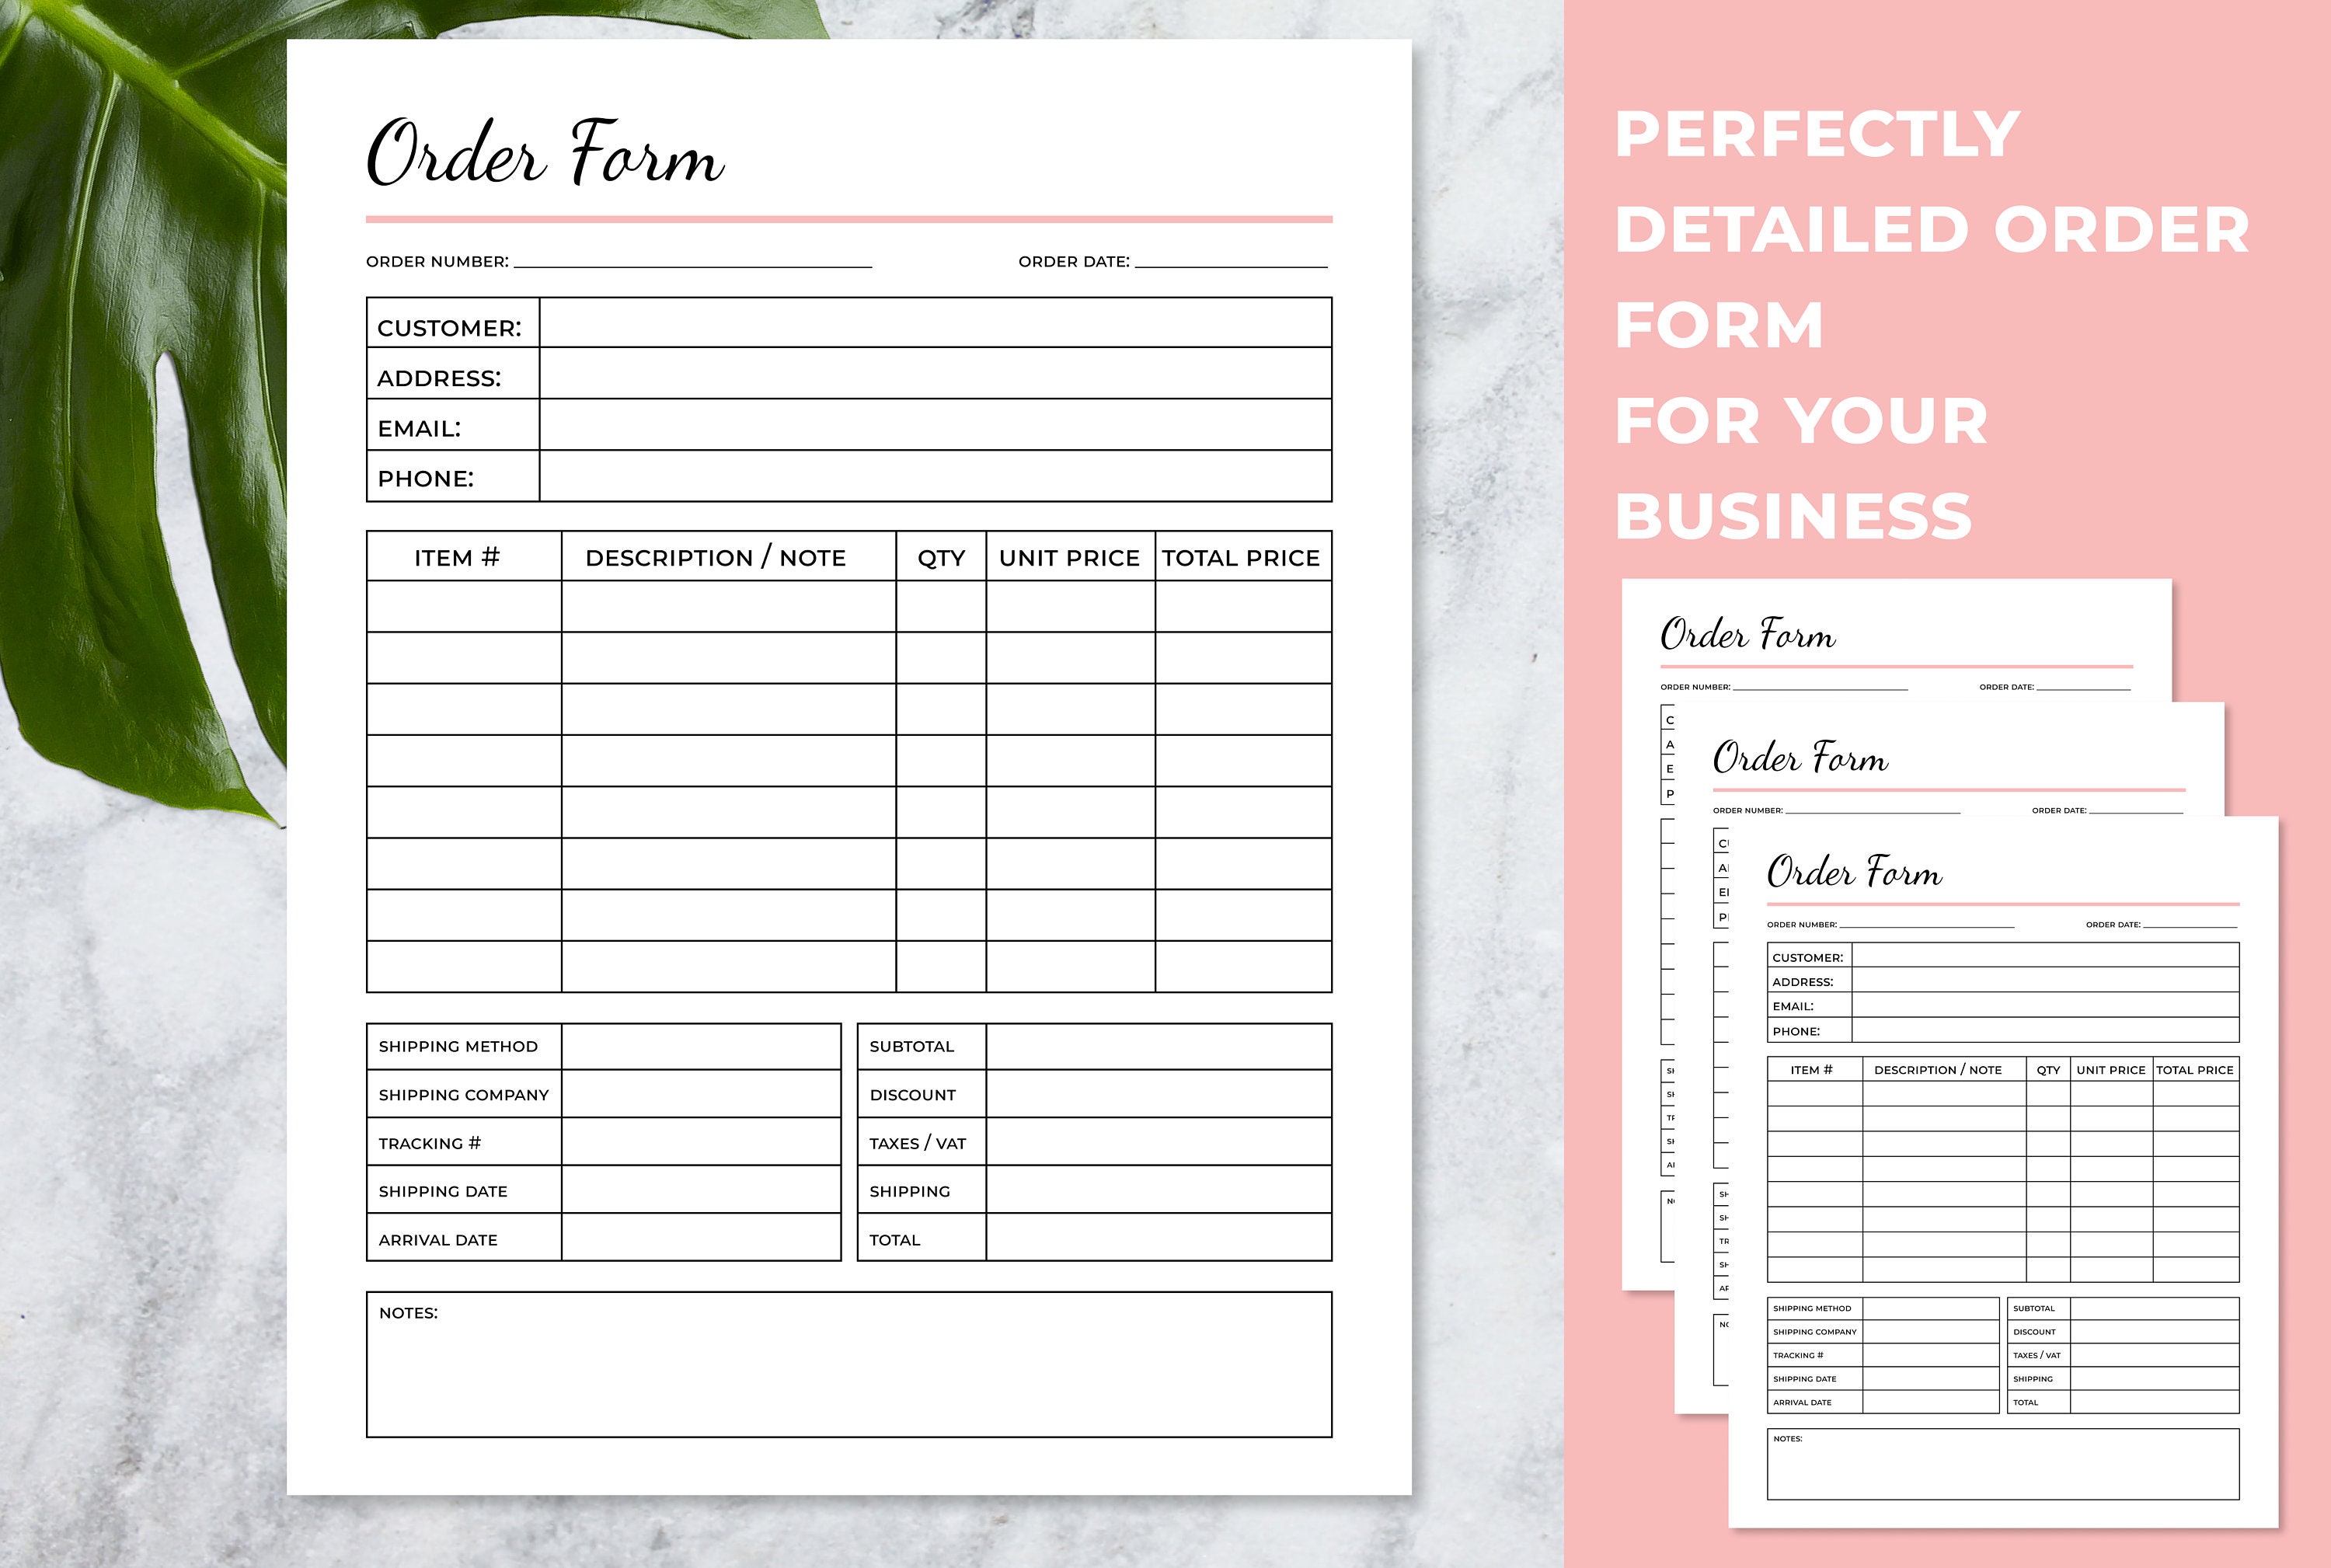 candle business plan template free